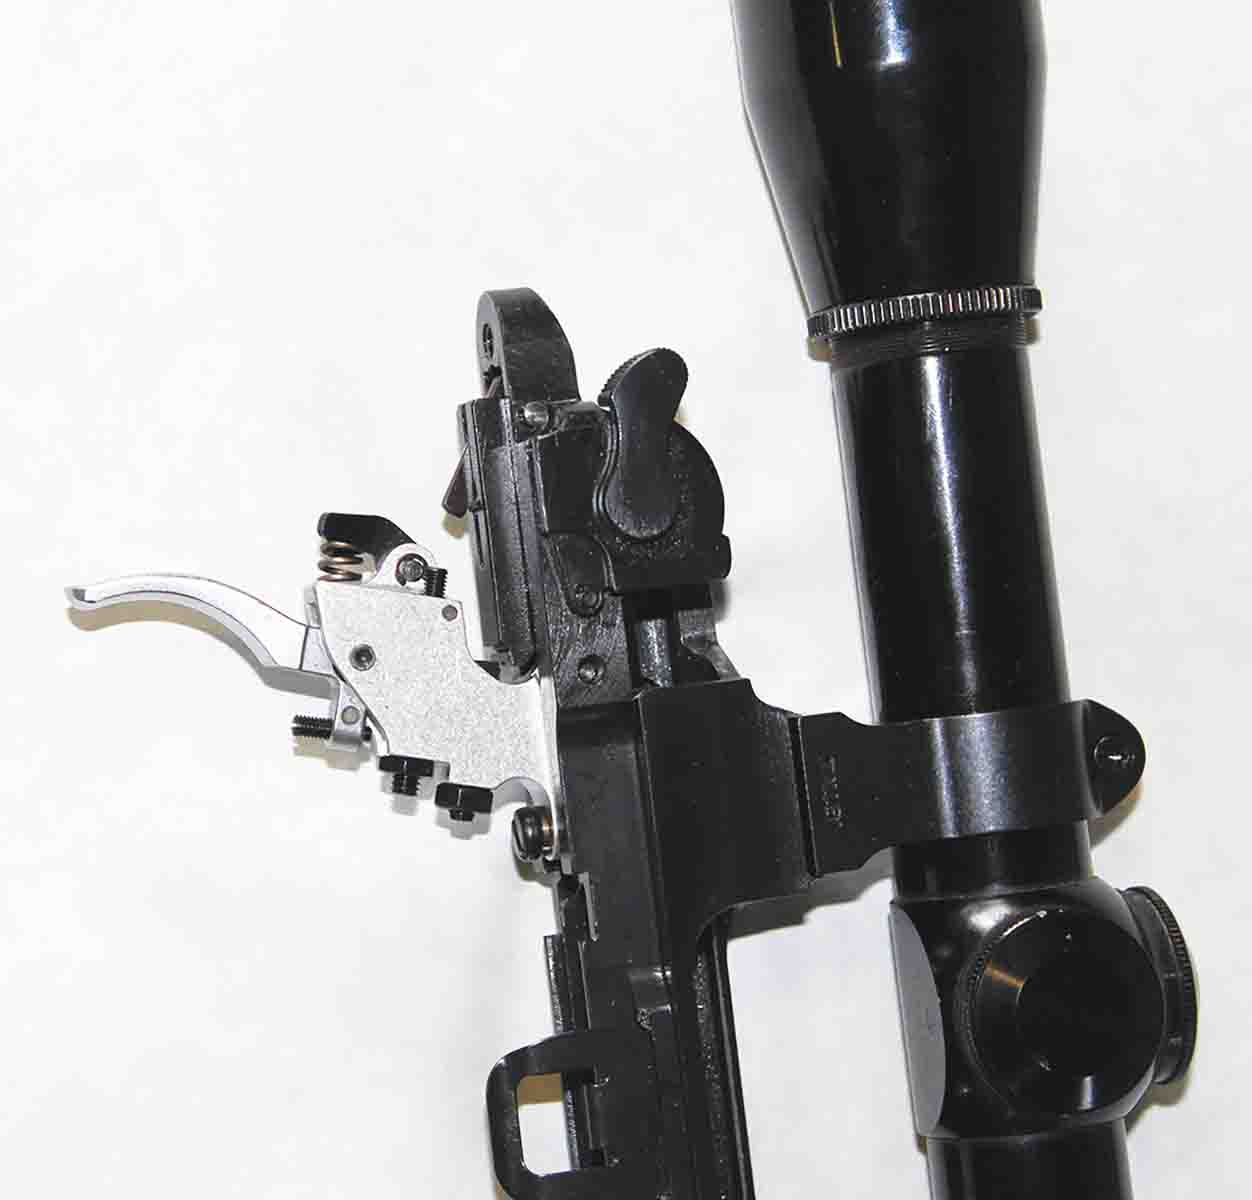 CZ-USA’s single-set trigger allows shooters to adjust settings to their personal tastes, including pull weight (top front nut), creep (middle front) and overtravel (rear).